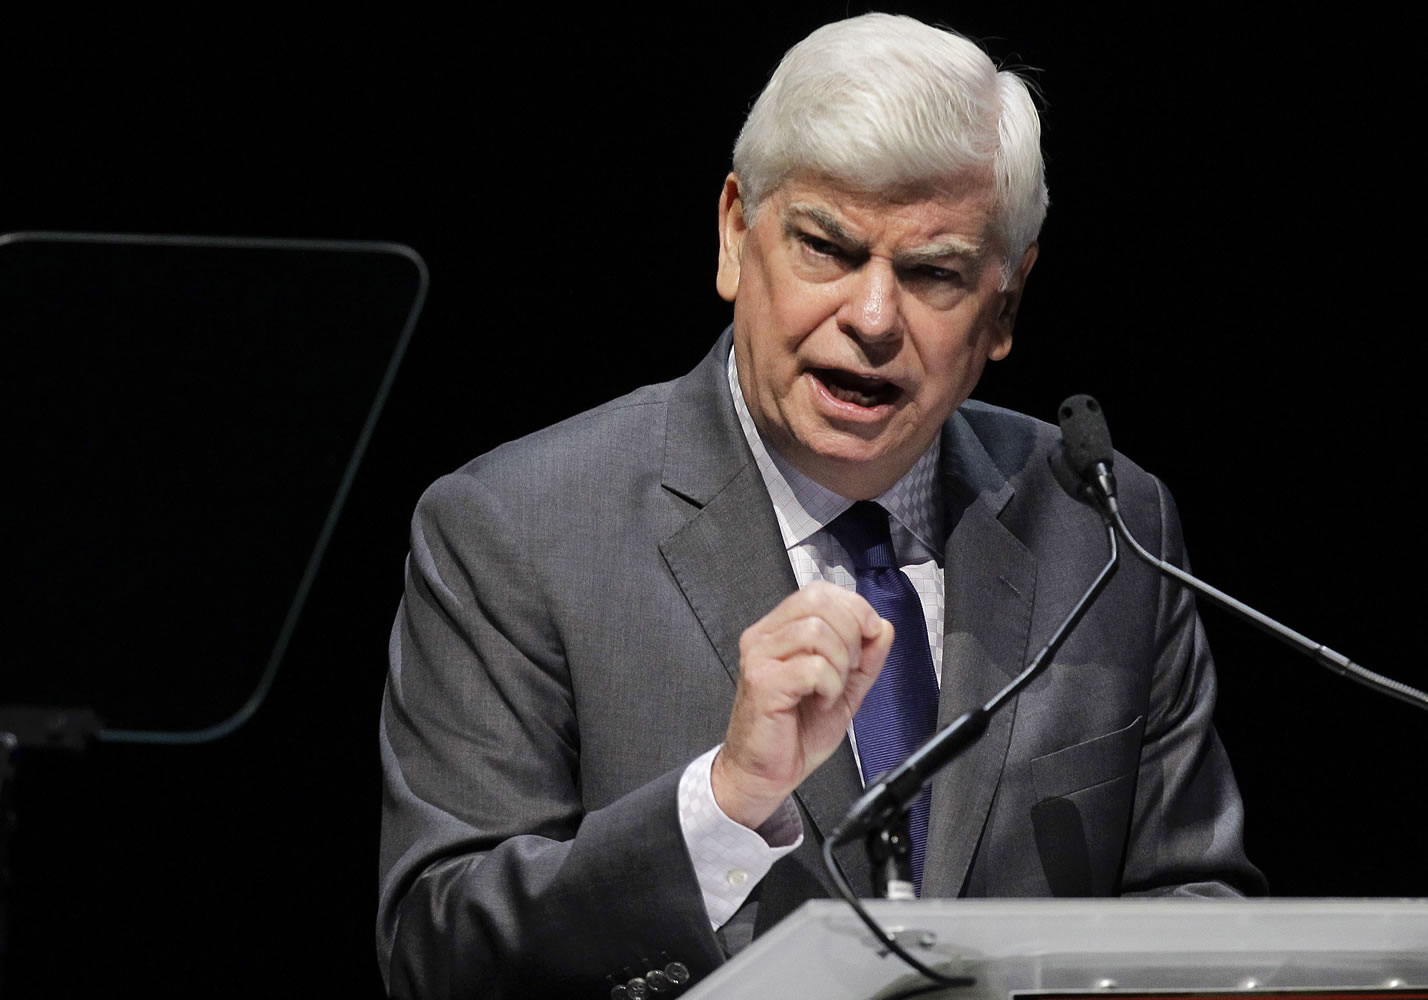 Motion Picture of Association of America of Chief Executive Chris Dodd speaks during his CinemaCon State of the Industry address in Las Vegas.